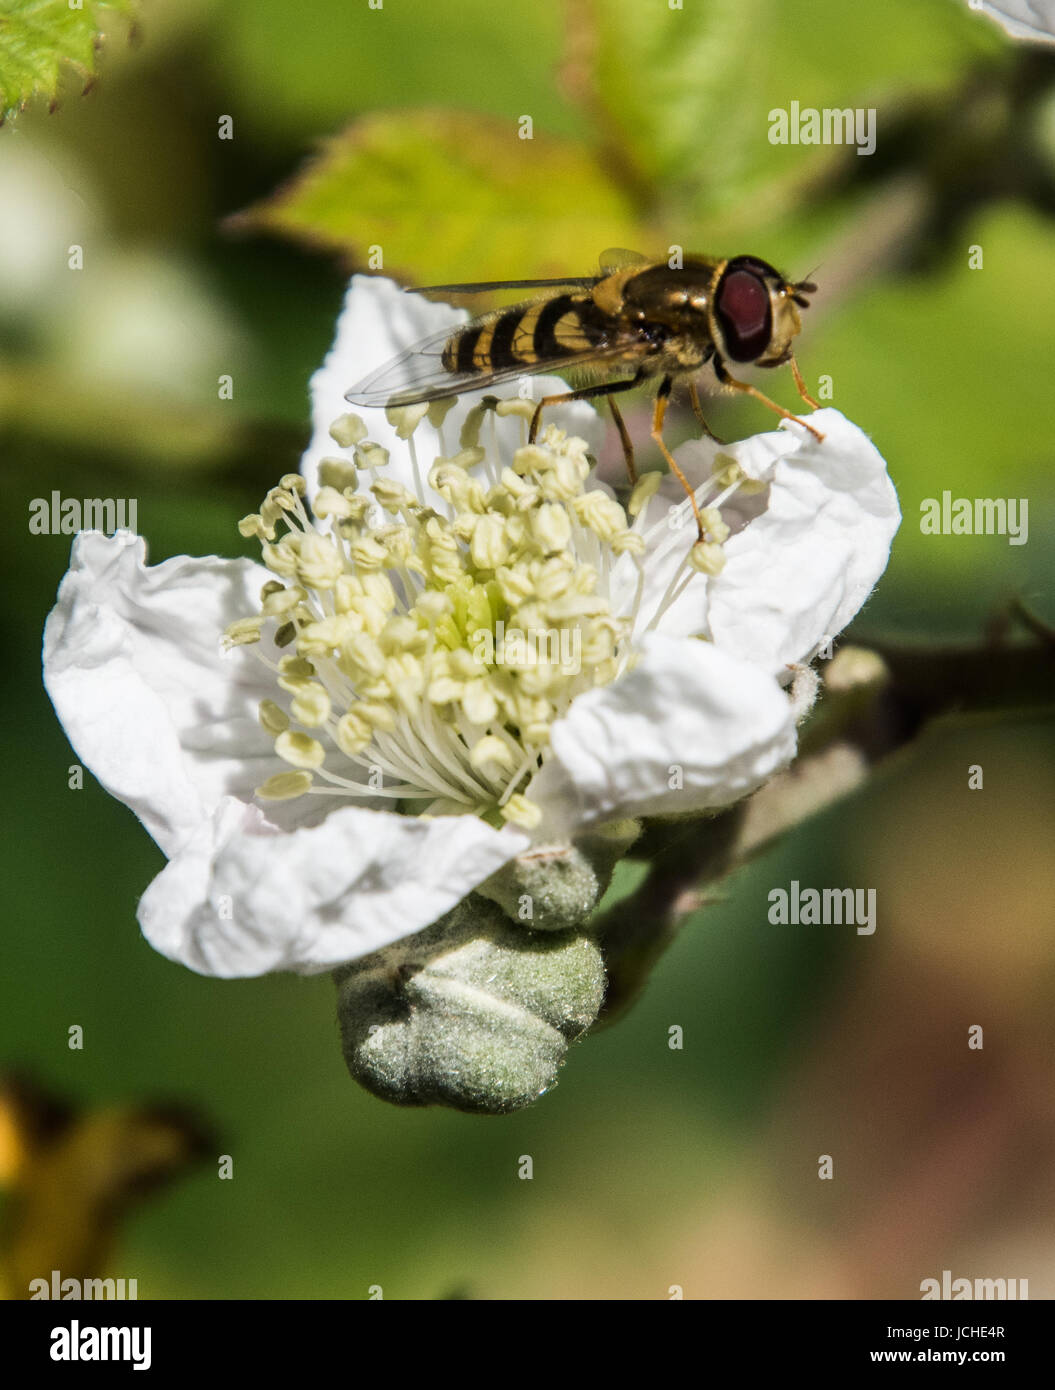 blackberry blossom and hoverfly Stock Photo